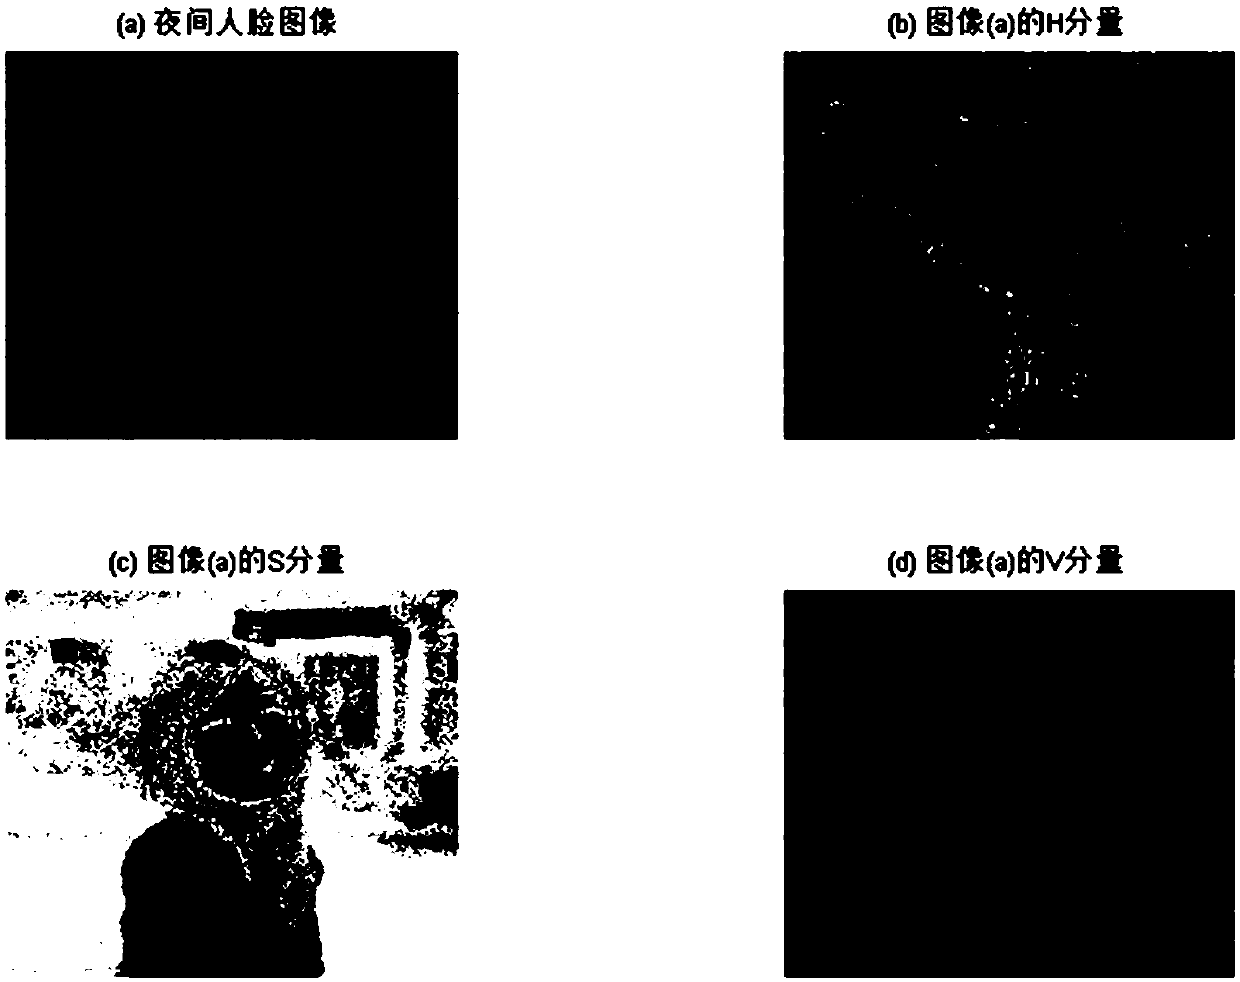 Night face video image enhancement and noise reduction method